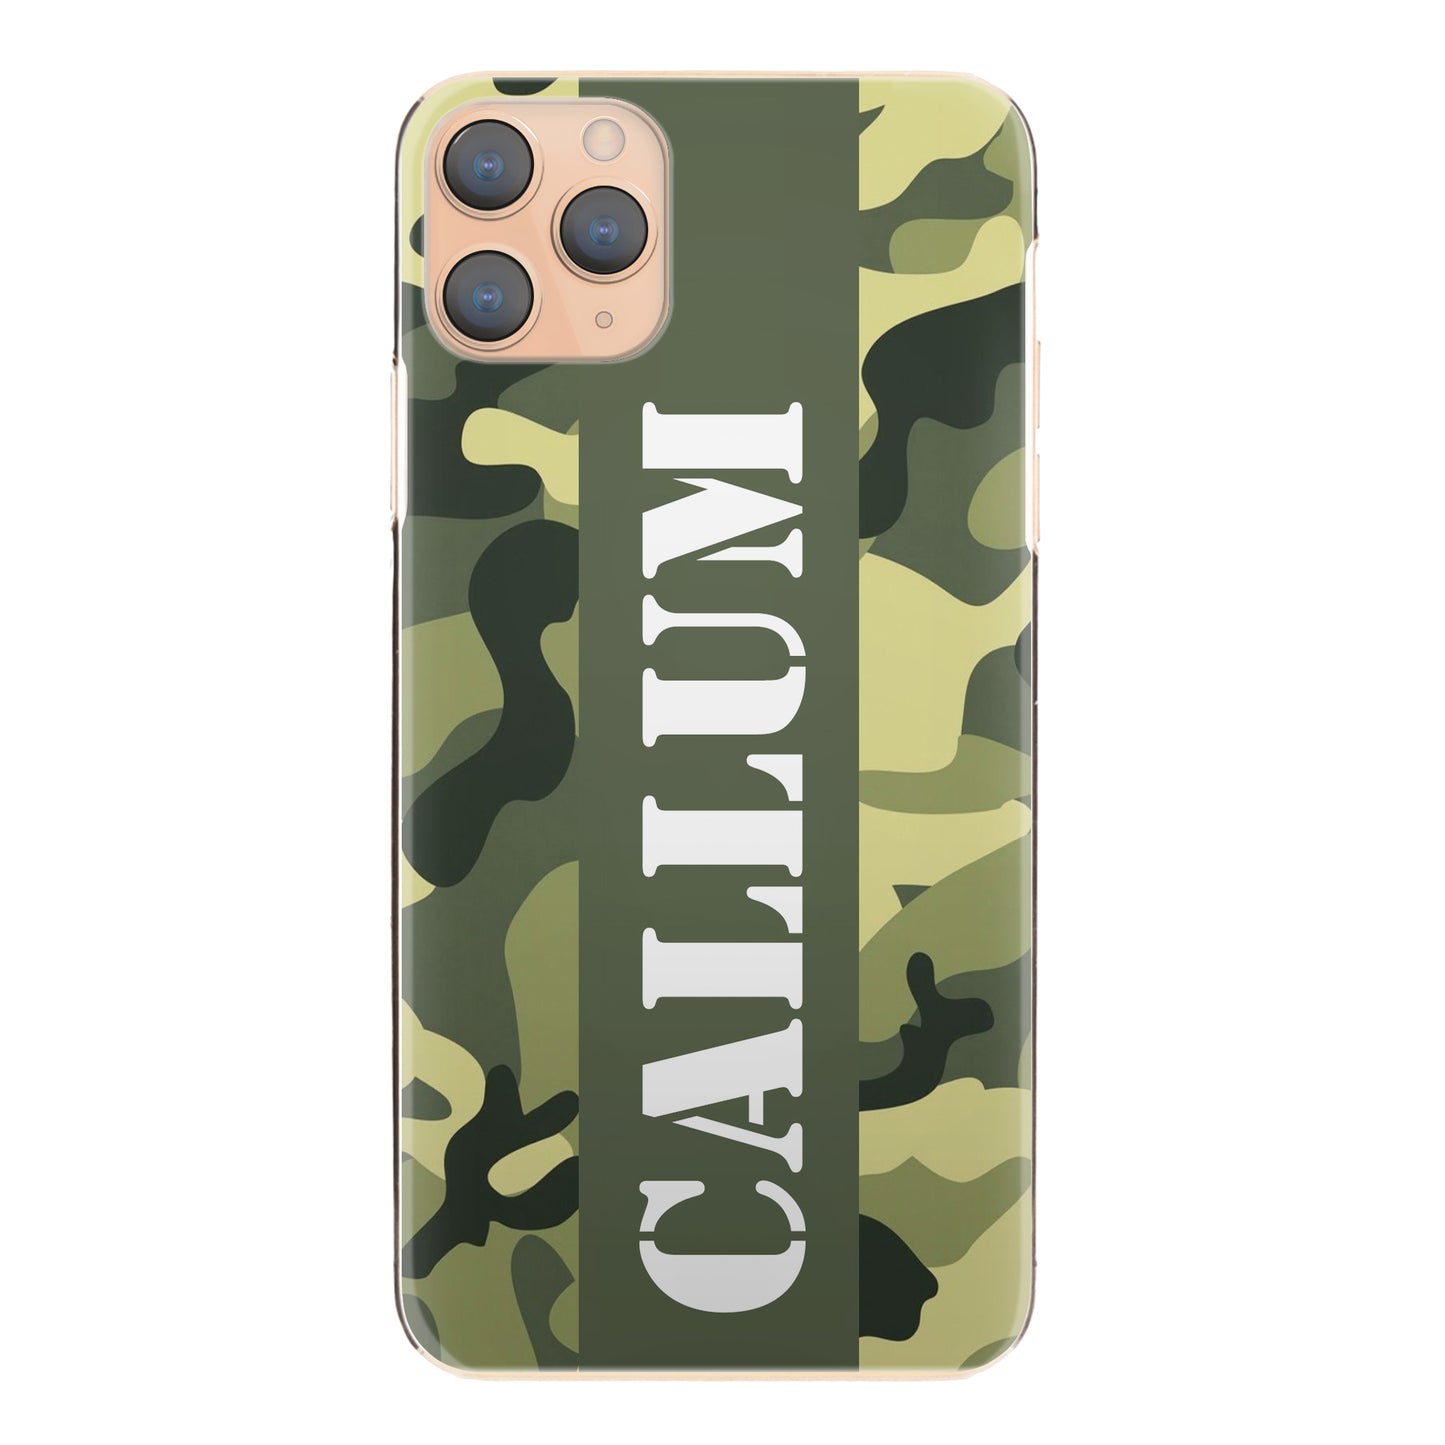 Personalised Honor Phone Hard Case with Military Text on Classic Green Camo